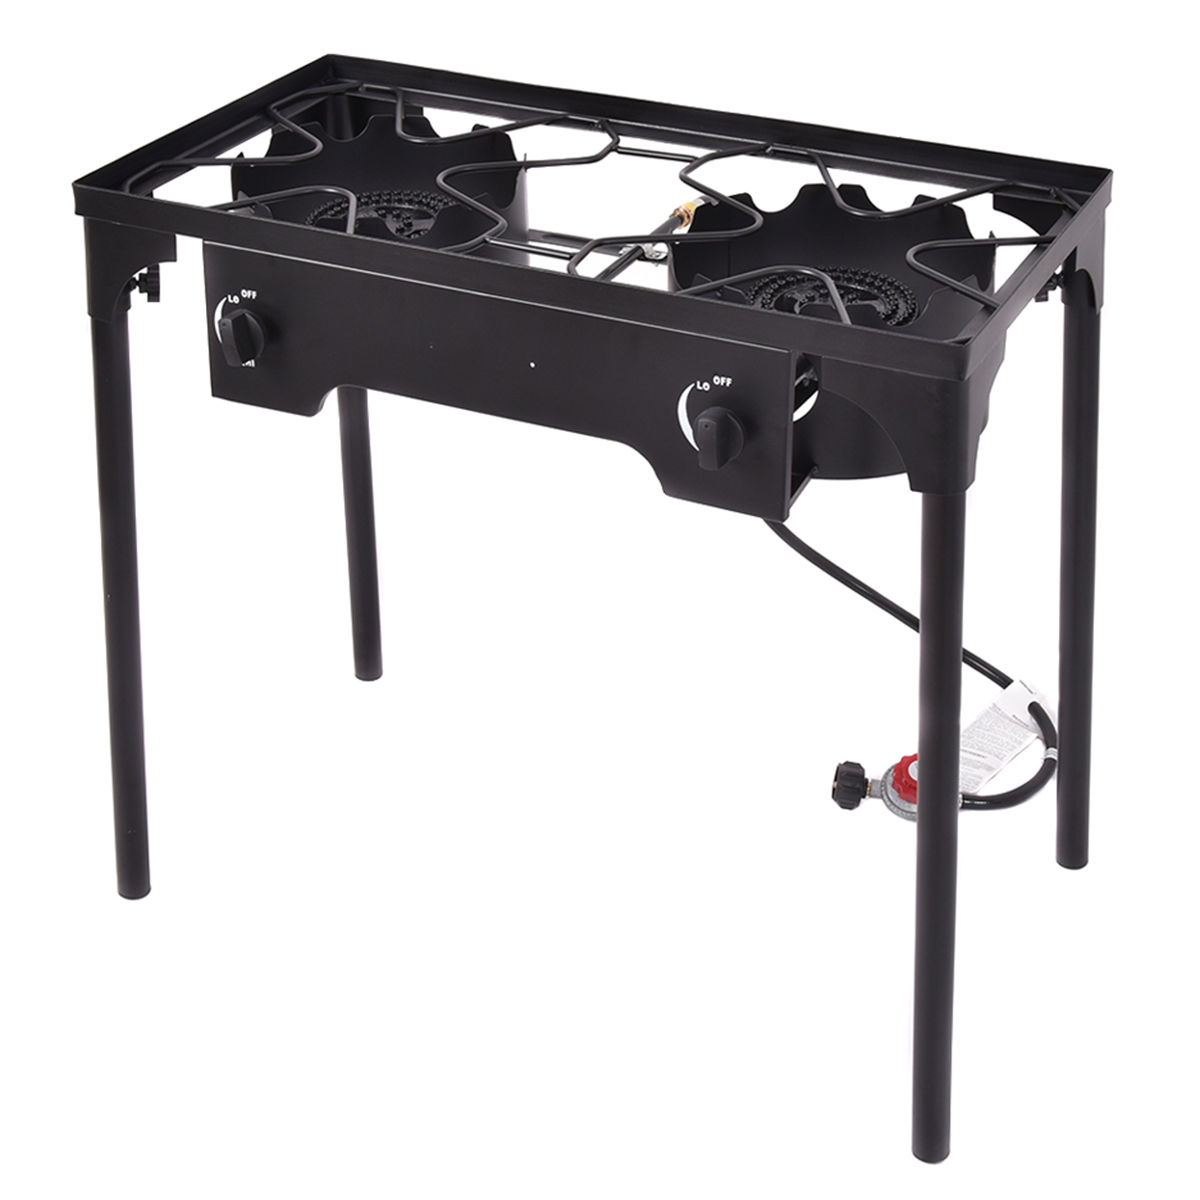 Costway Double Burner Gas Propane Cooker Outdoor Picnic Stove Stand BBQ Grill - image 1 of 10